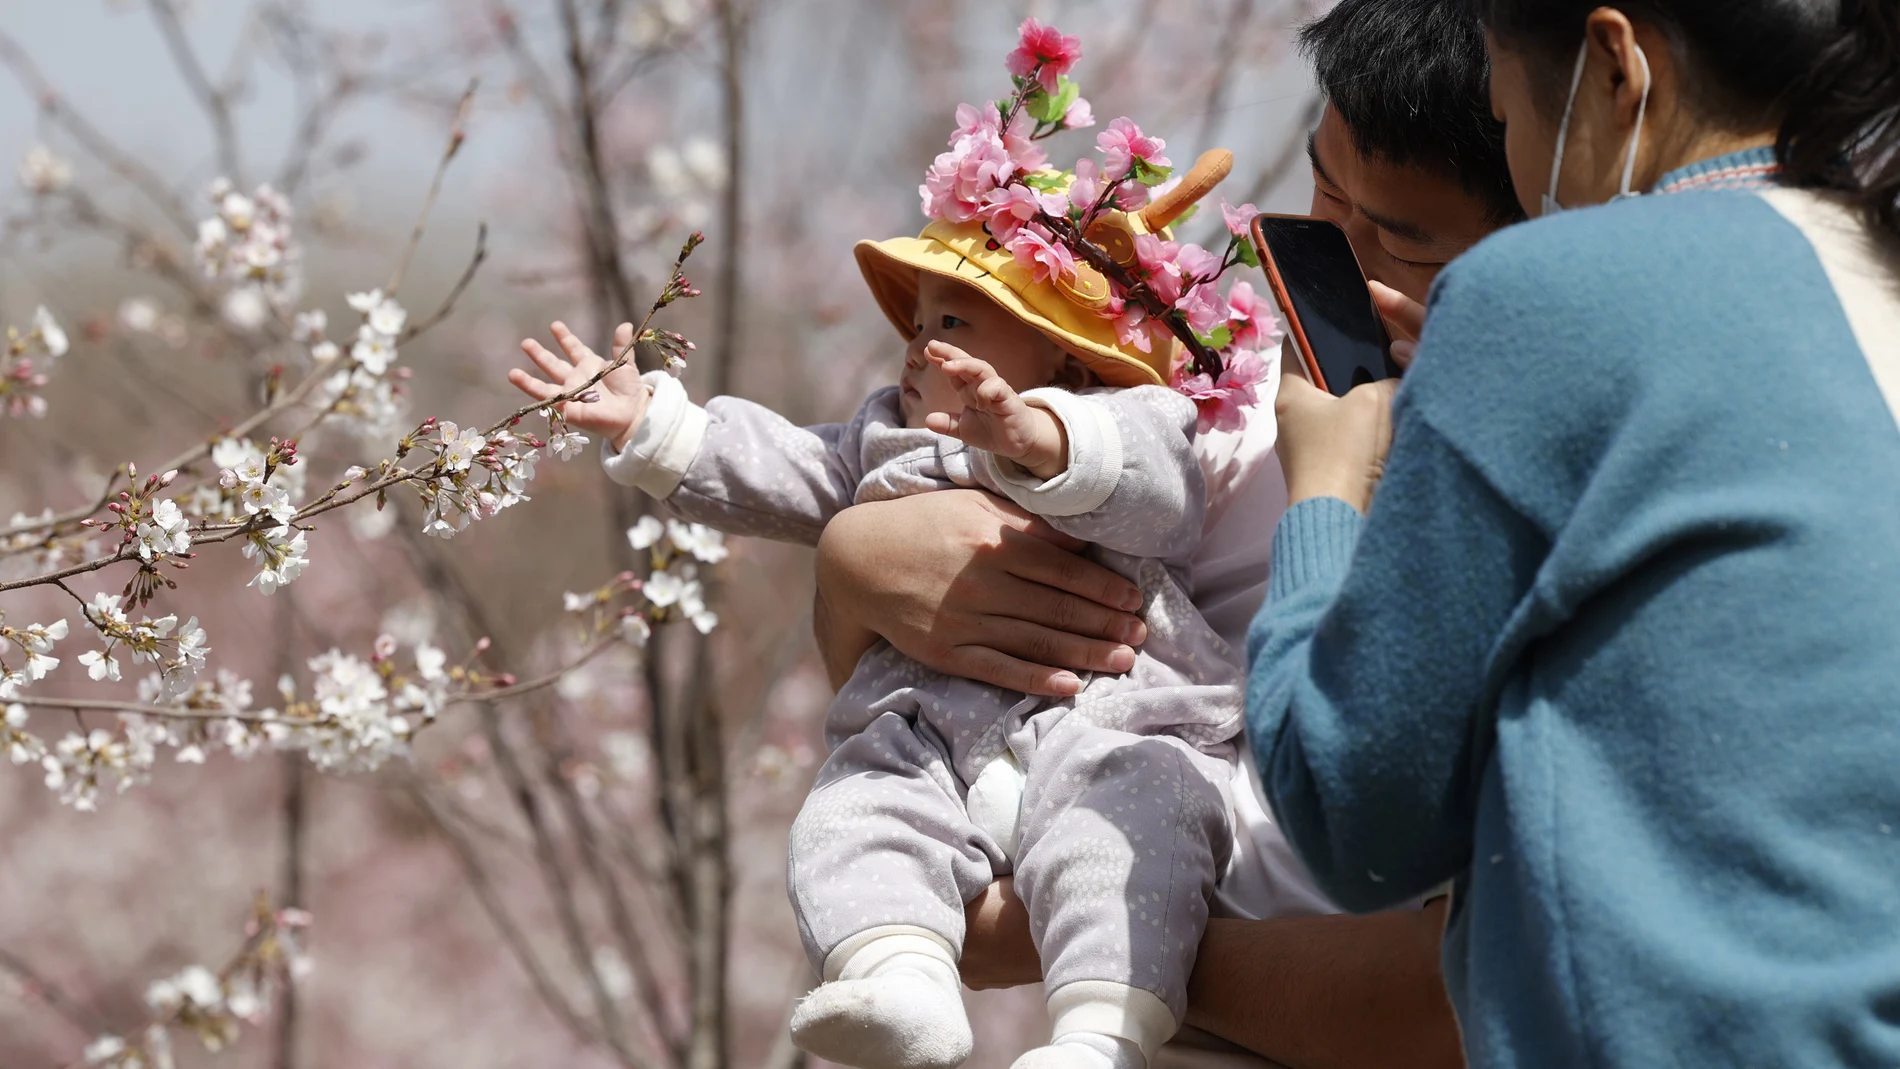 A man holds a child for photos near a cherry blossom tree in Beijing on Wednesday, March 24, 2021. China's population grew last year, the government said Thursday, April 29, 2021 following a news report a once-a-decade census might have found a decline, possibly adding to downward pressure on economic growth. (AP Photo/Ng Han Guan)